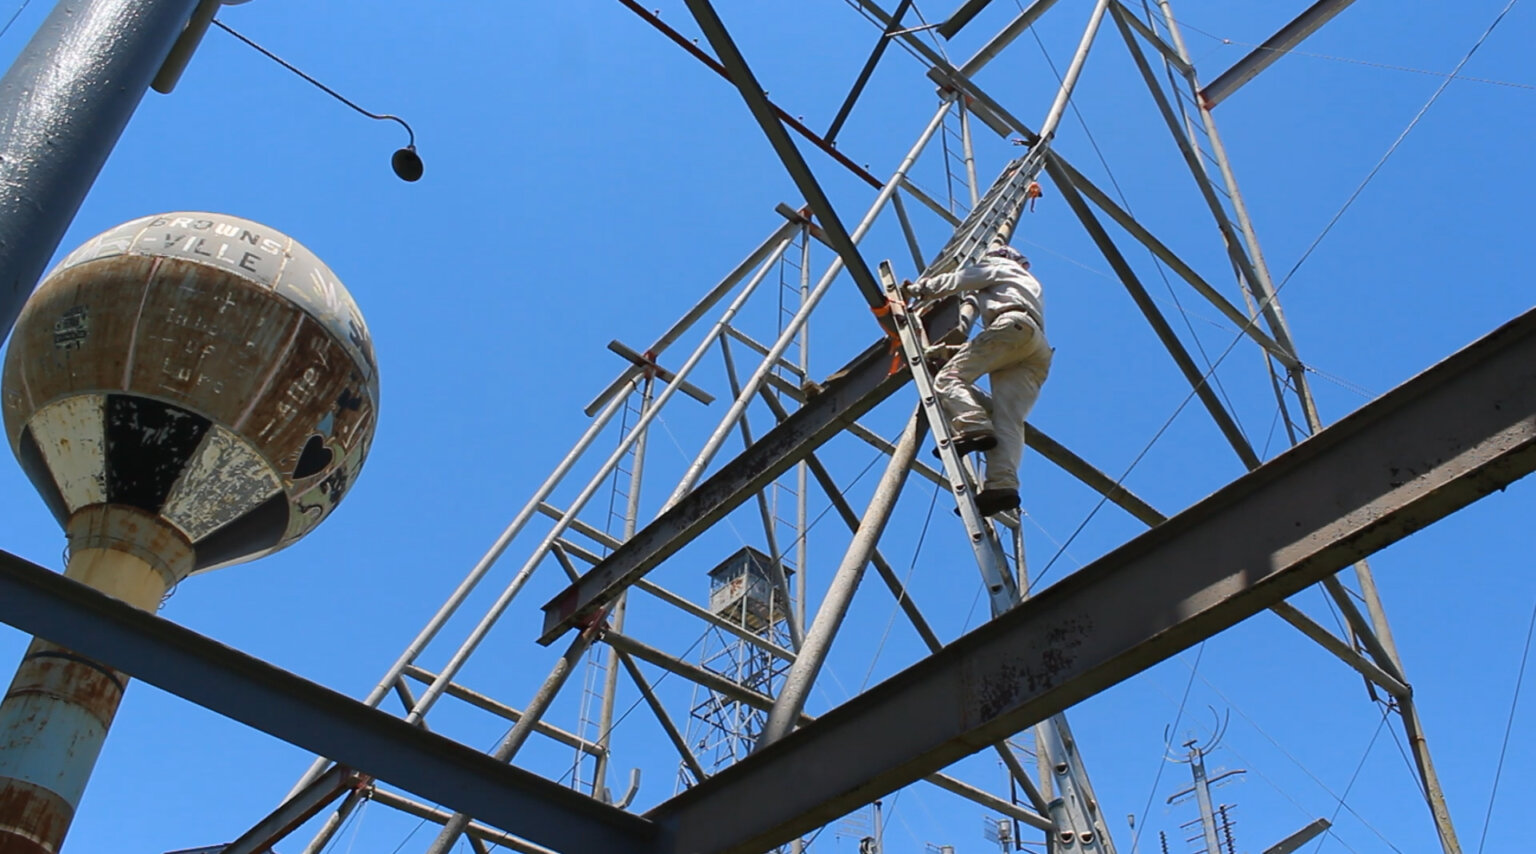 Brownsville’s Mindfield sculpture subject of new film